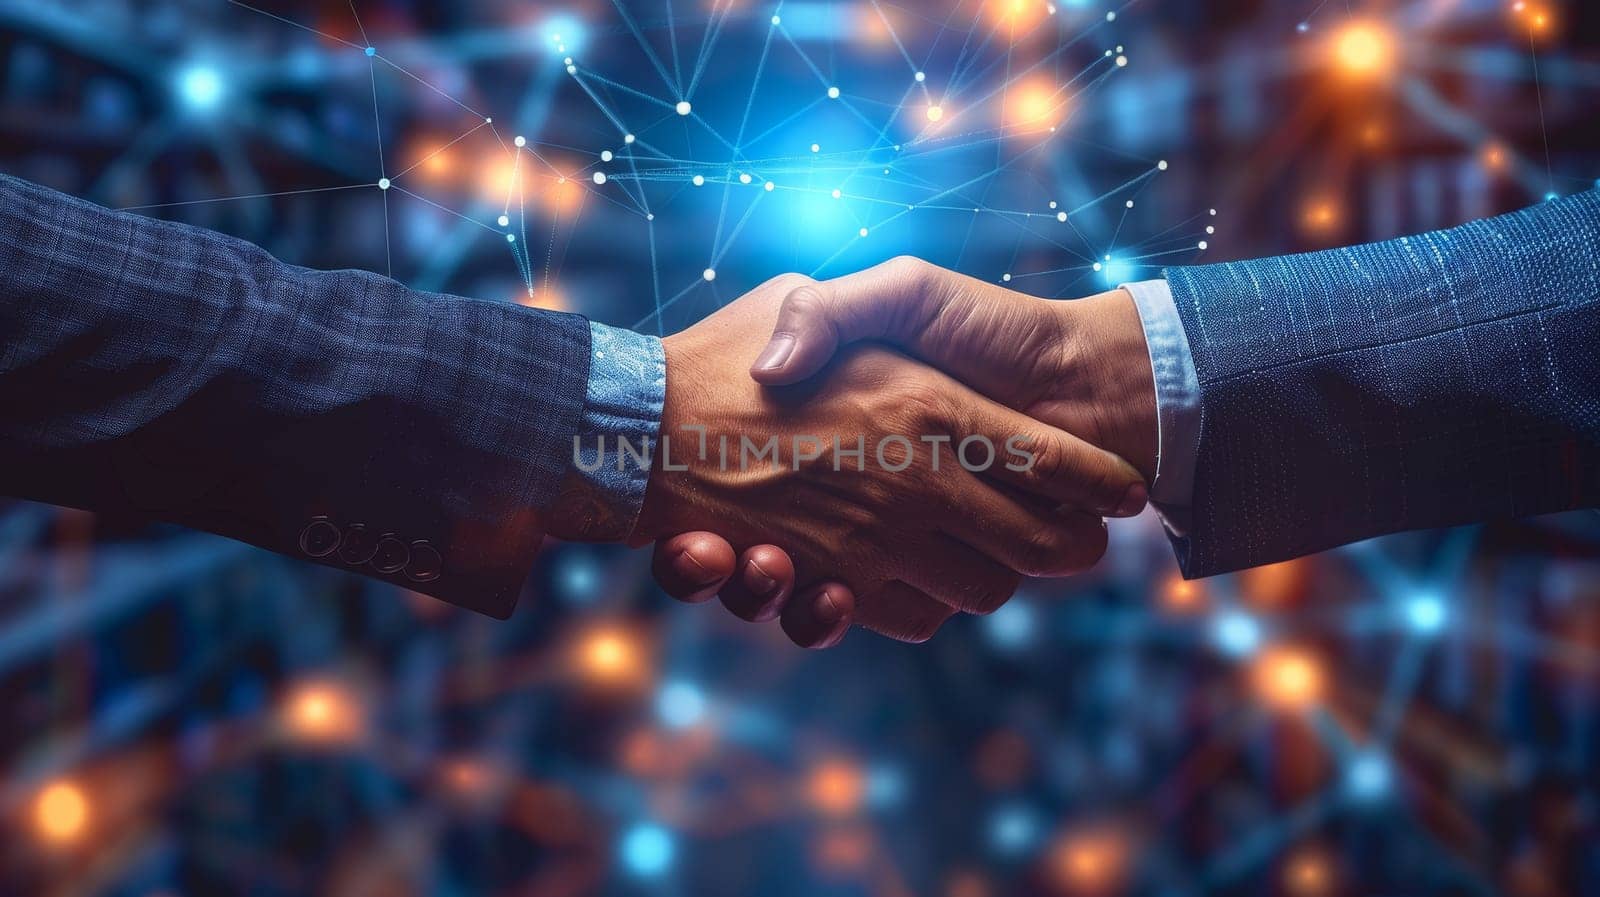 Two people shaking hands. The handshake is a symbol of agreement and trust. Concept of professionalism and respect